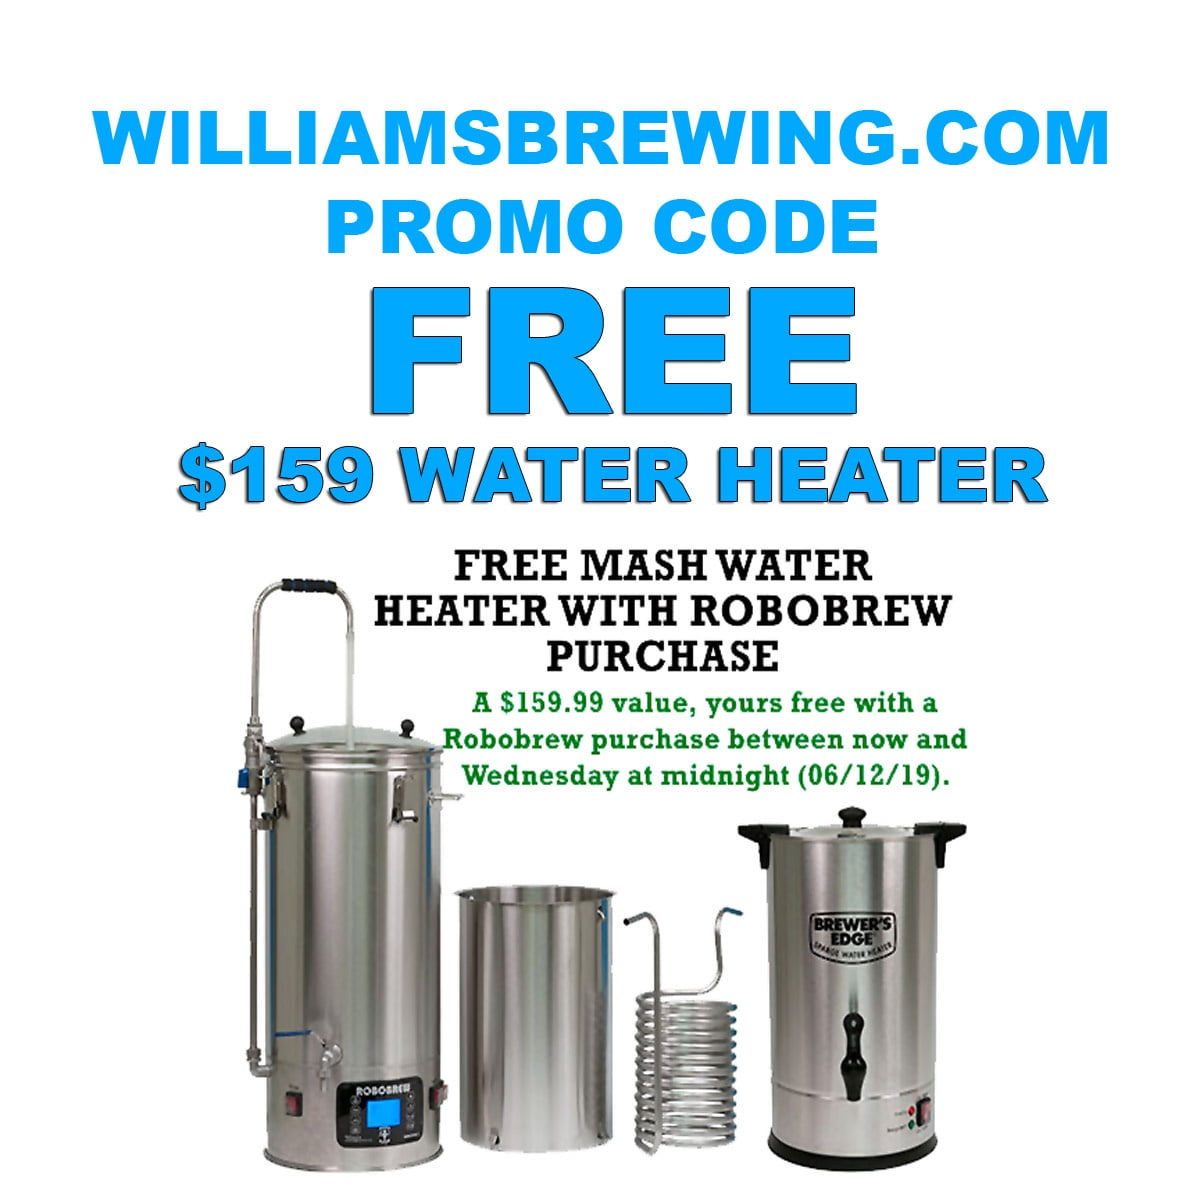 RoboBrew Promo Code for a FREE Stainless Steel Mash Water Heater at Williams Brewing